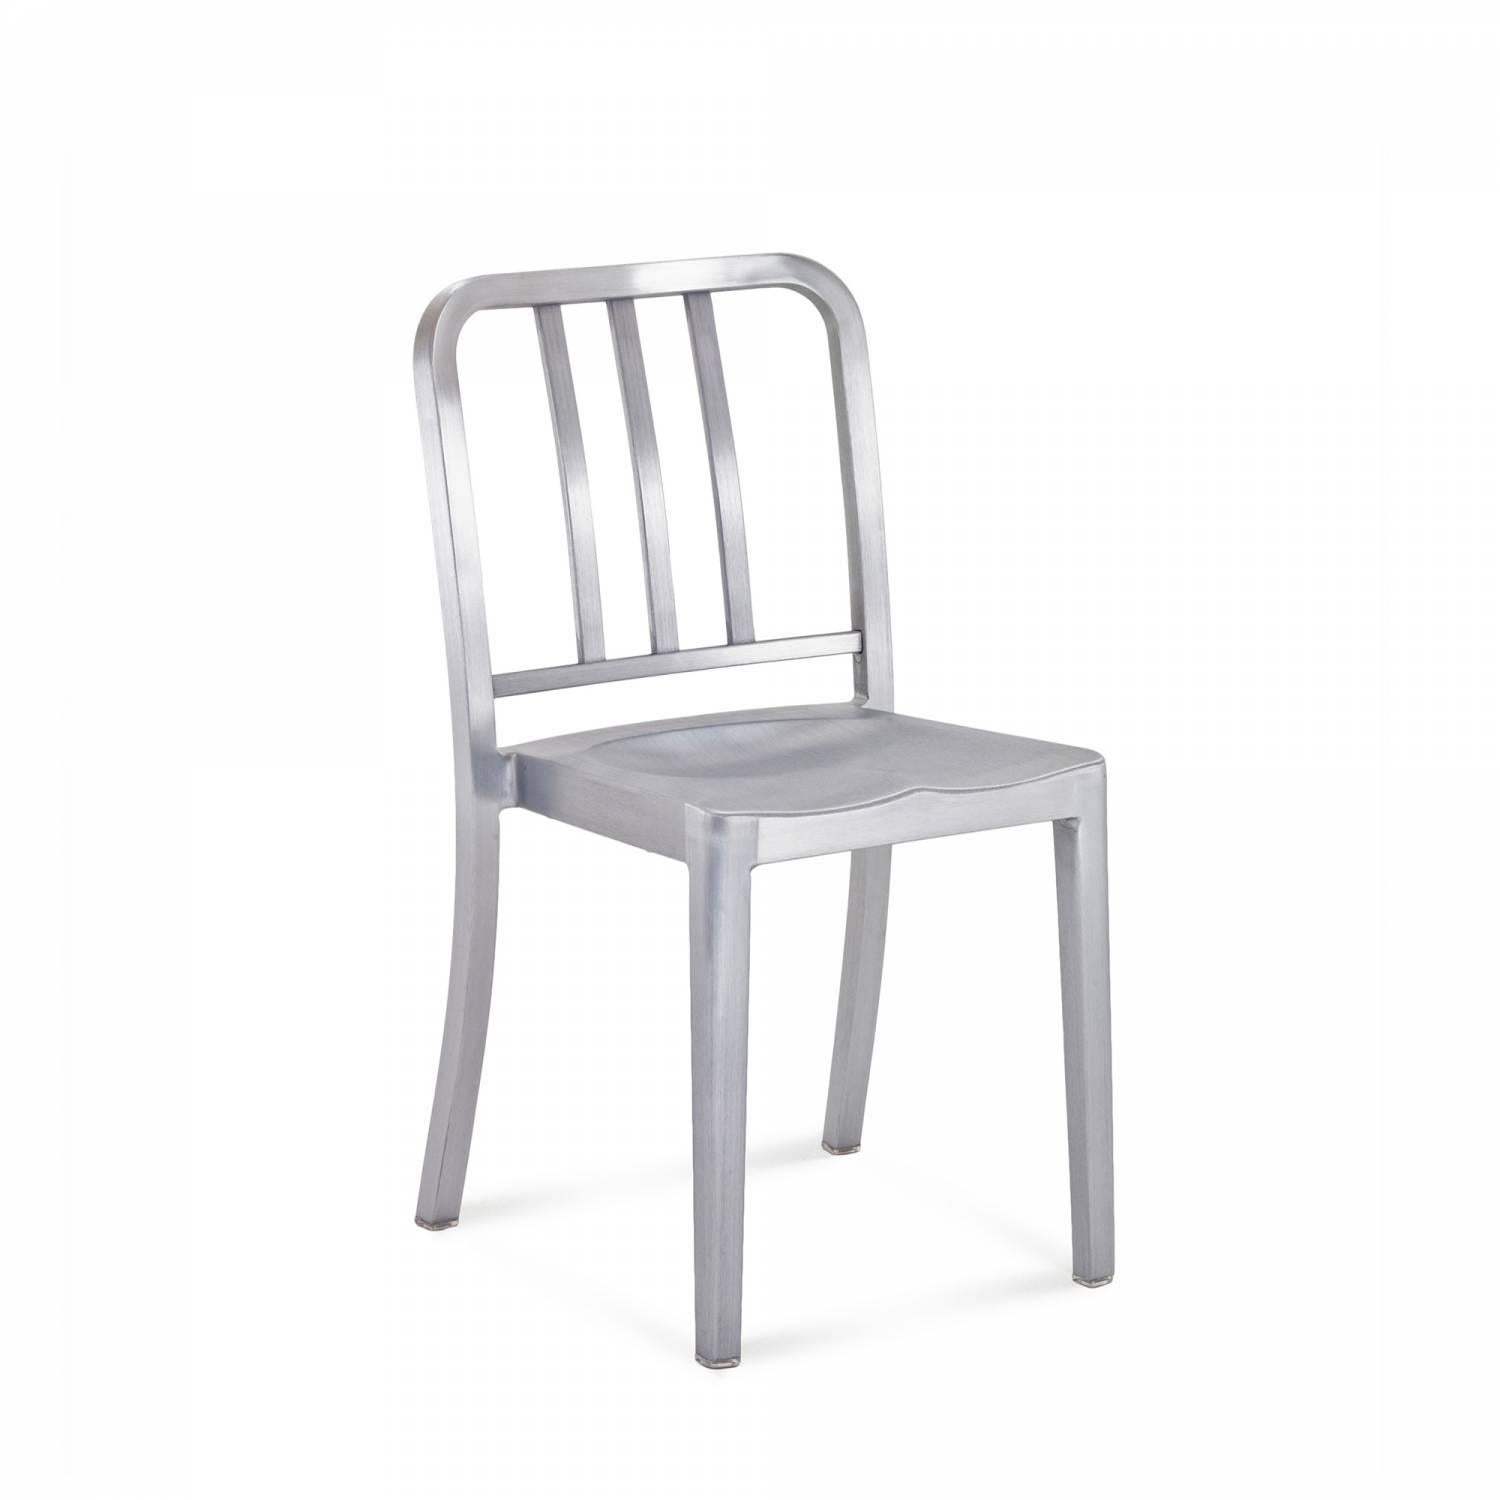 Heritage is a stacking chair designed by Philippe Starck, inspired by the original 1006 Navy.The rocking version was designed for the world famous Bon restaurant in Paris. Intended as a “sit up” chair for working and dining, it’s a symbol of Emeco’s